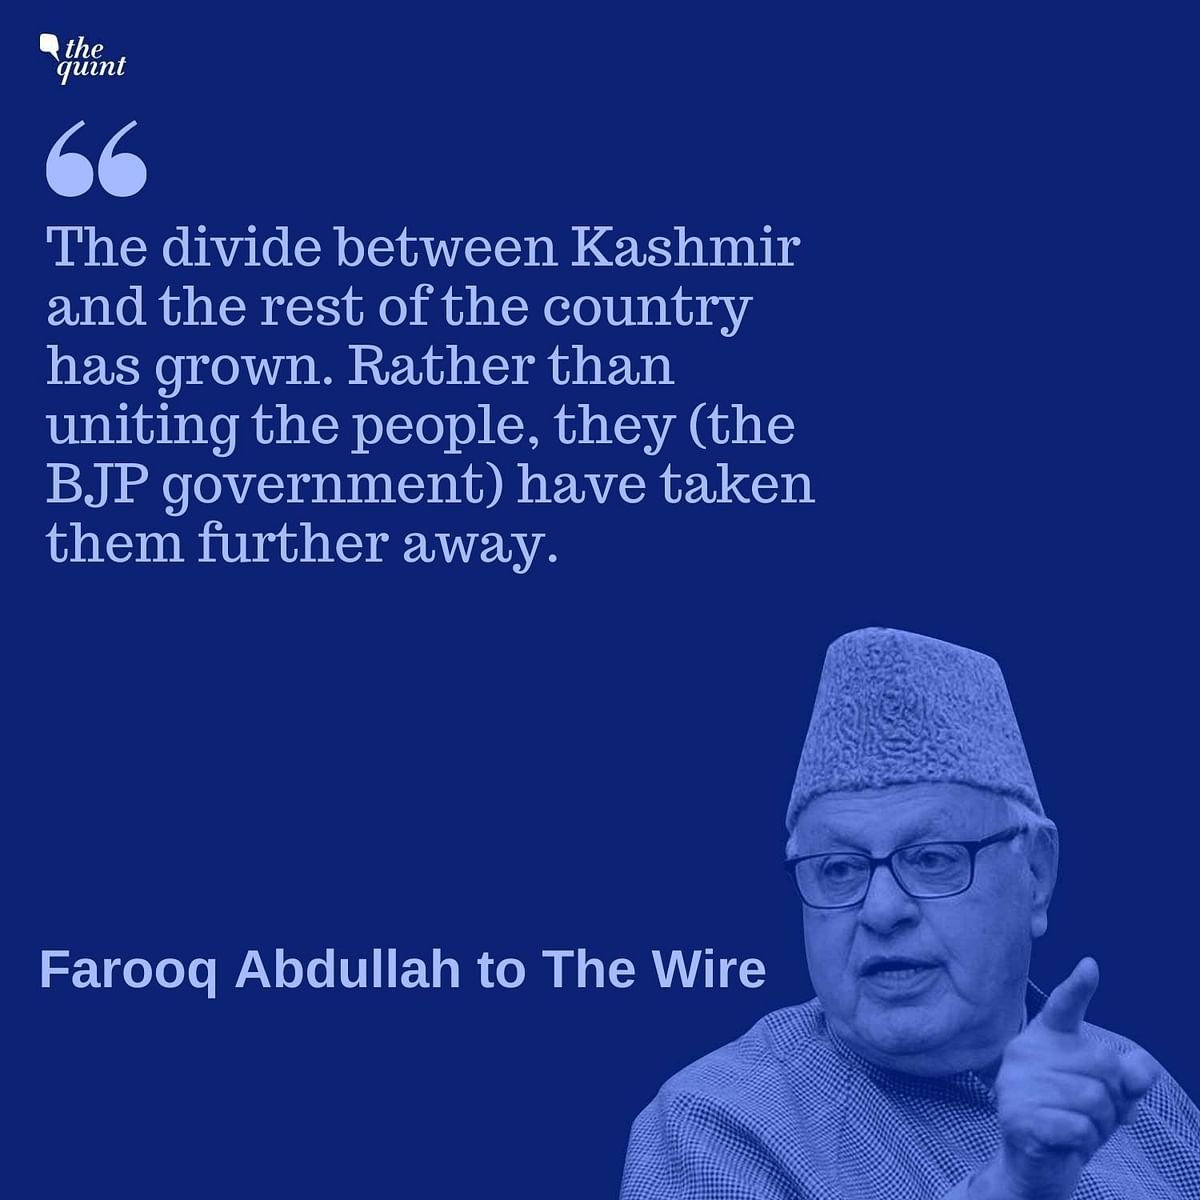 “We went against the current and joined the Gandhis’ India, not Modi’s India” said Farooq Abdullah.